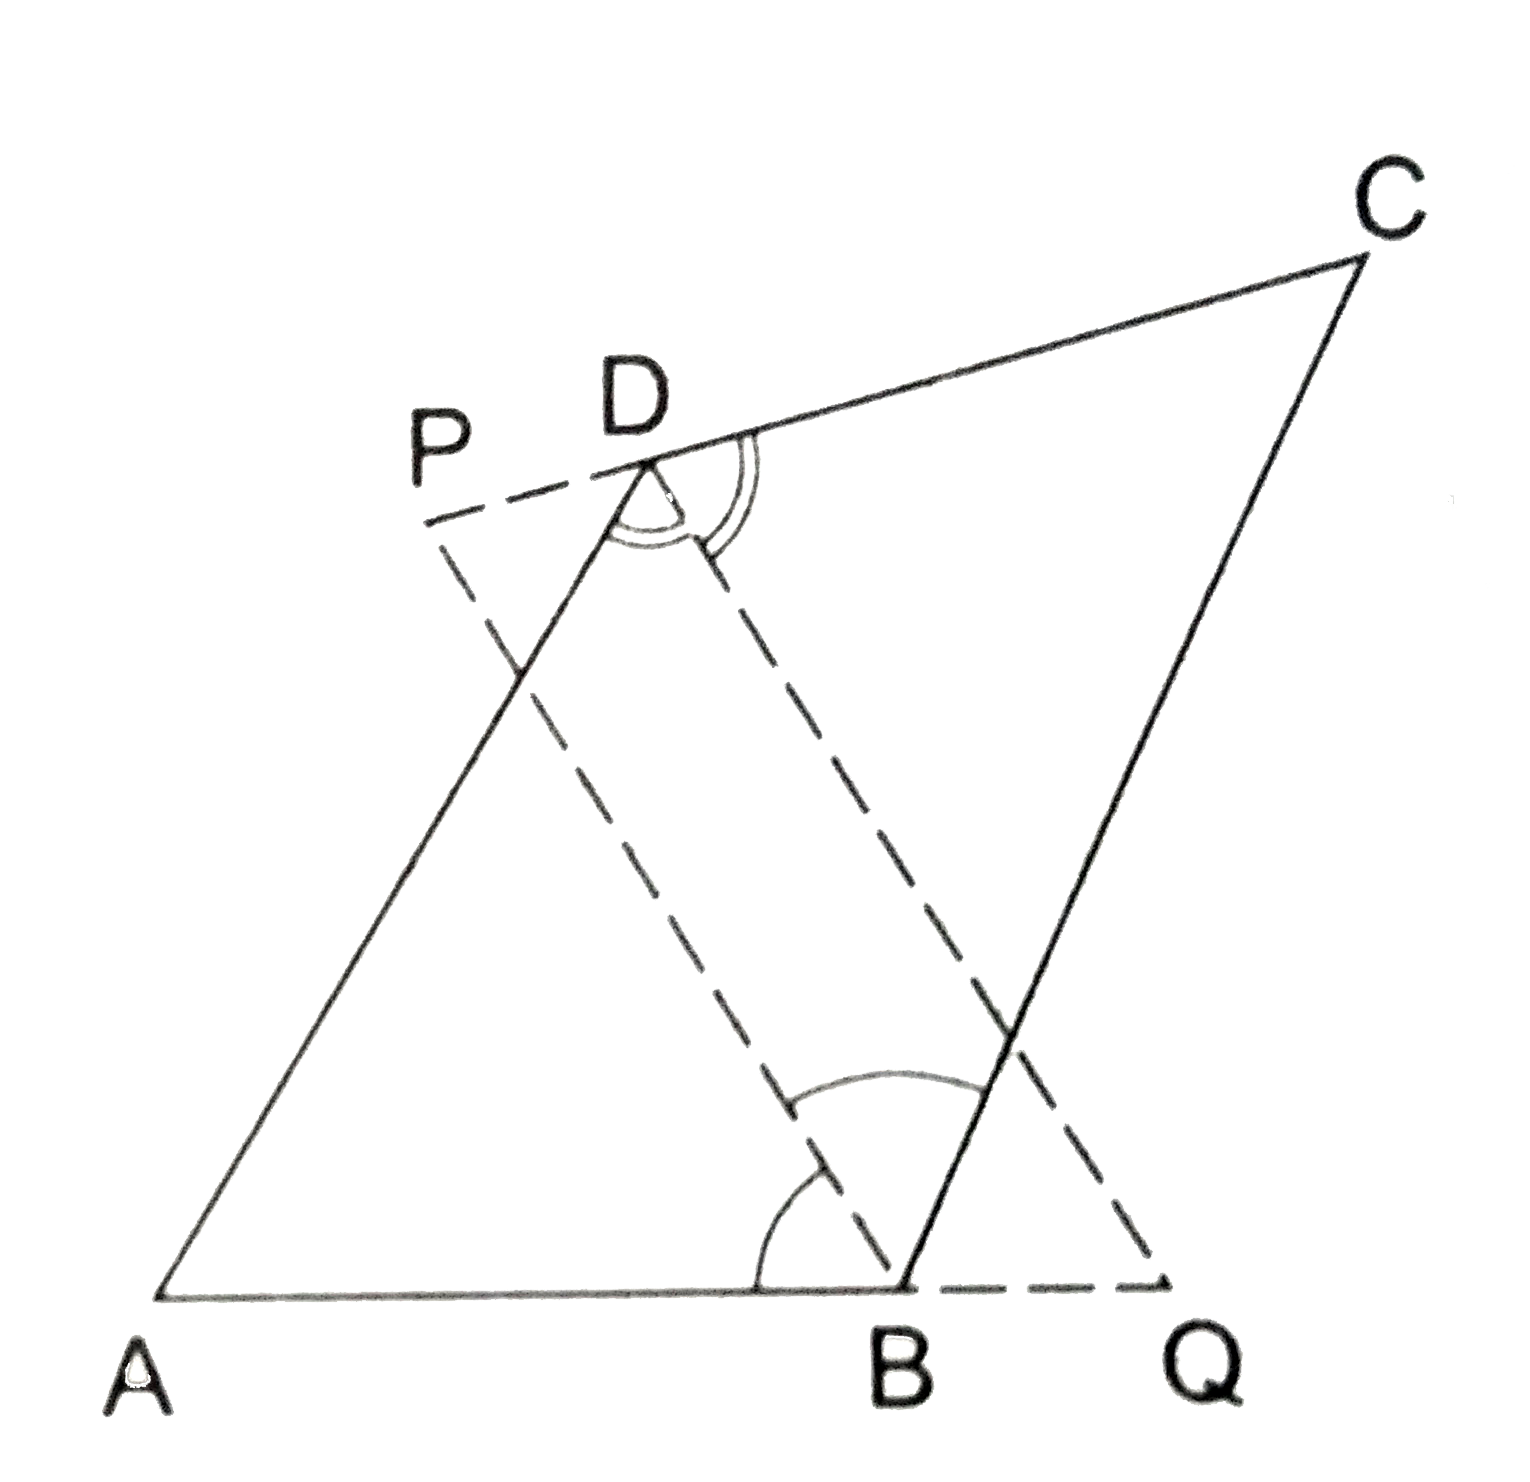 In the adjoining figure, the bisectors of   angle B and angle D  of a quadrilateral  ABCD meet CD and AB produced at P and Q respectively.   Proove that   angle P + angle Q =(1)/(2) (angle B +angle D).